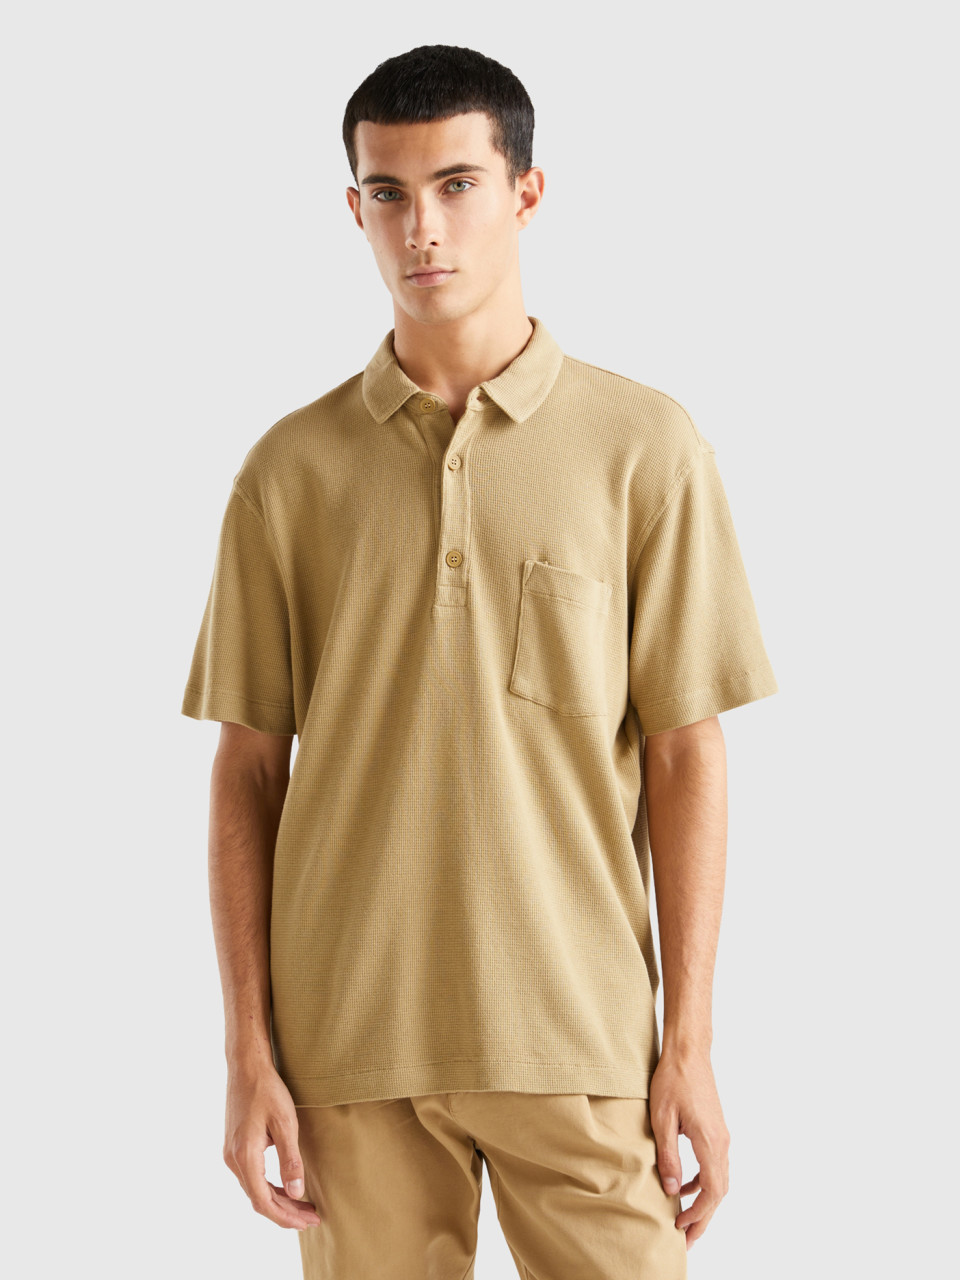 Benetton, Polo With Pocket And Relaxed Fit, Beige, Men